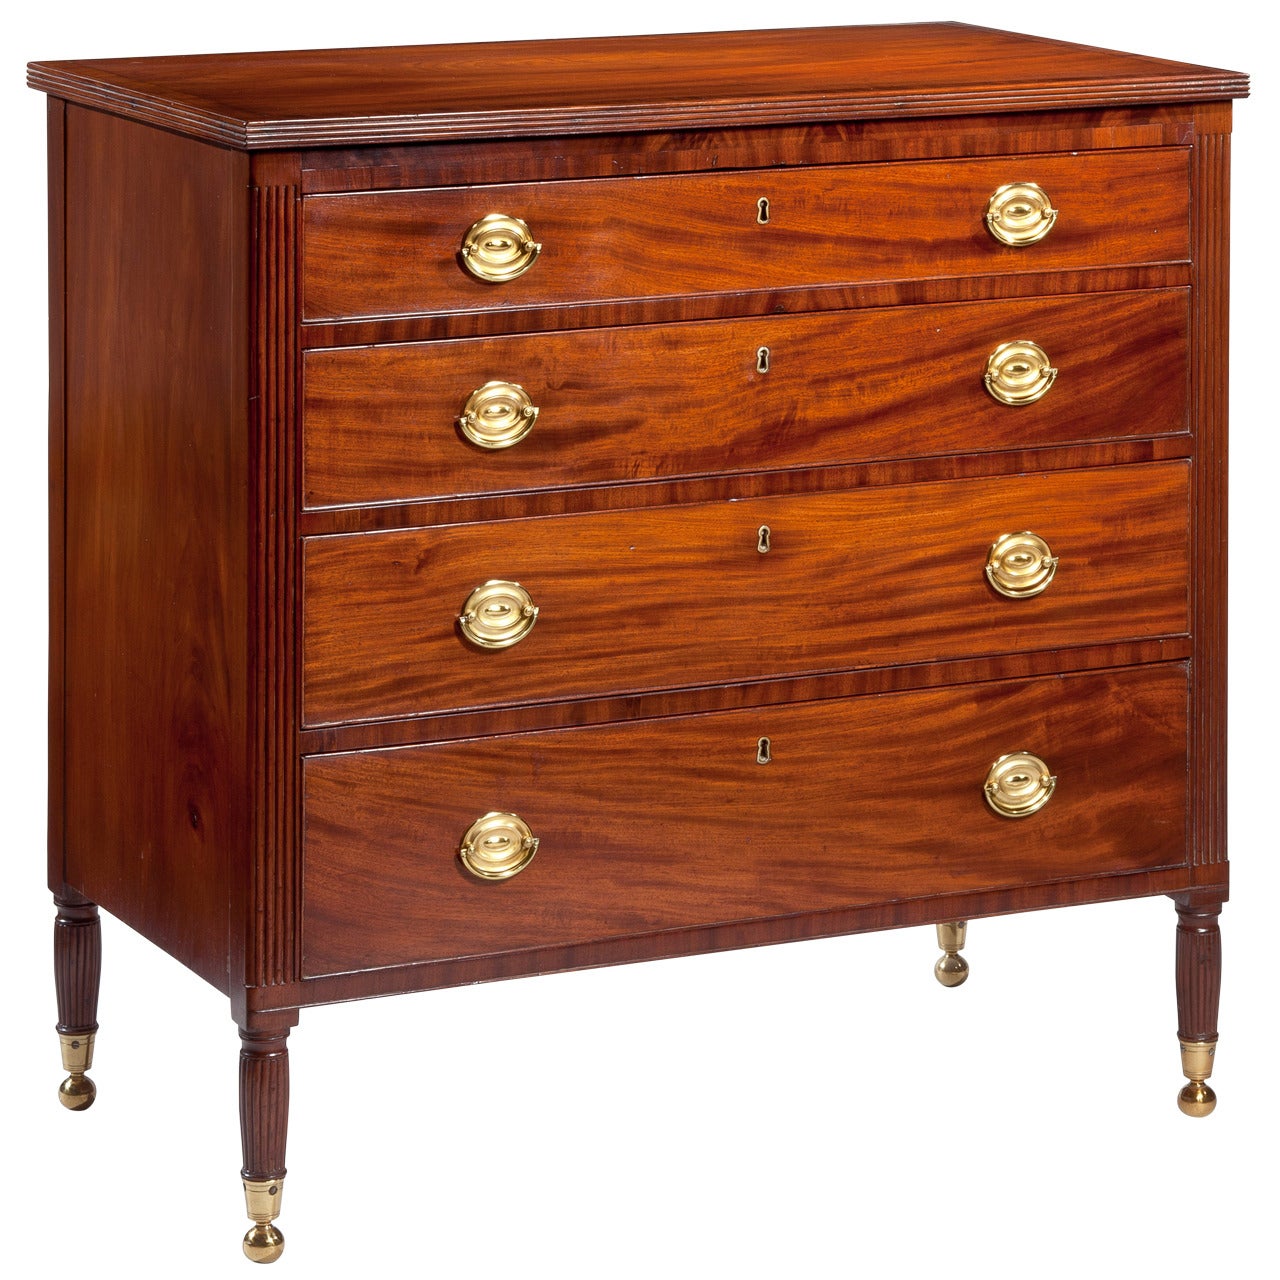 Sheraton Diminutive Brass Inlaid Chest of Drawers, circa 1807 For Sale